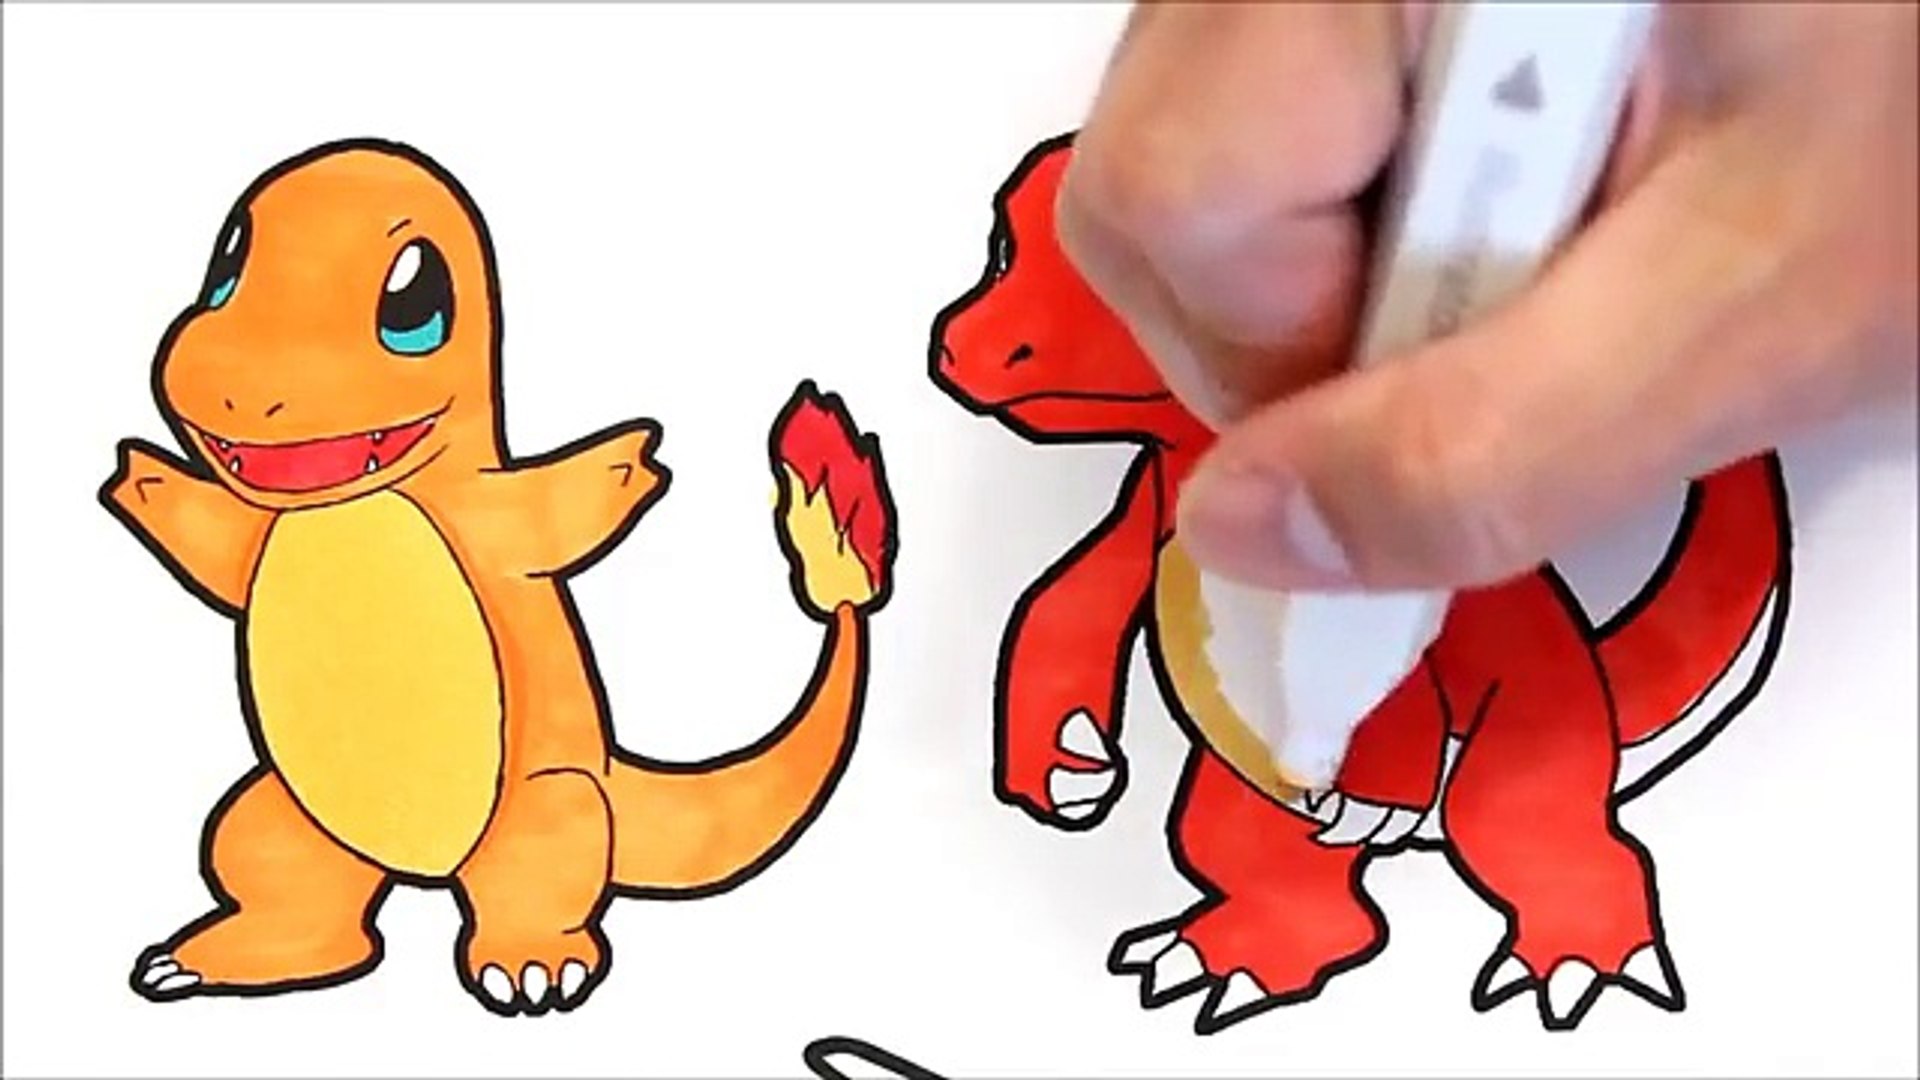 Pokémon coloring book pages for kids speed coloring Charmander Charmeleon  Charizard